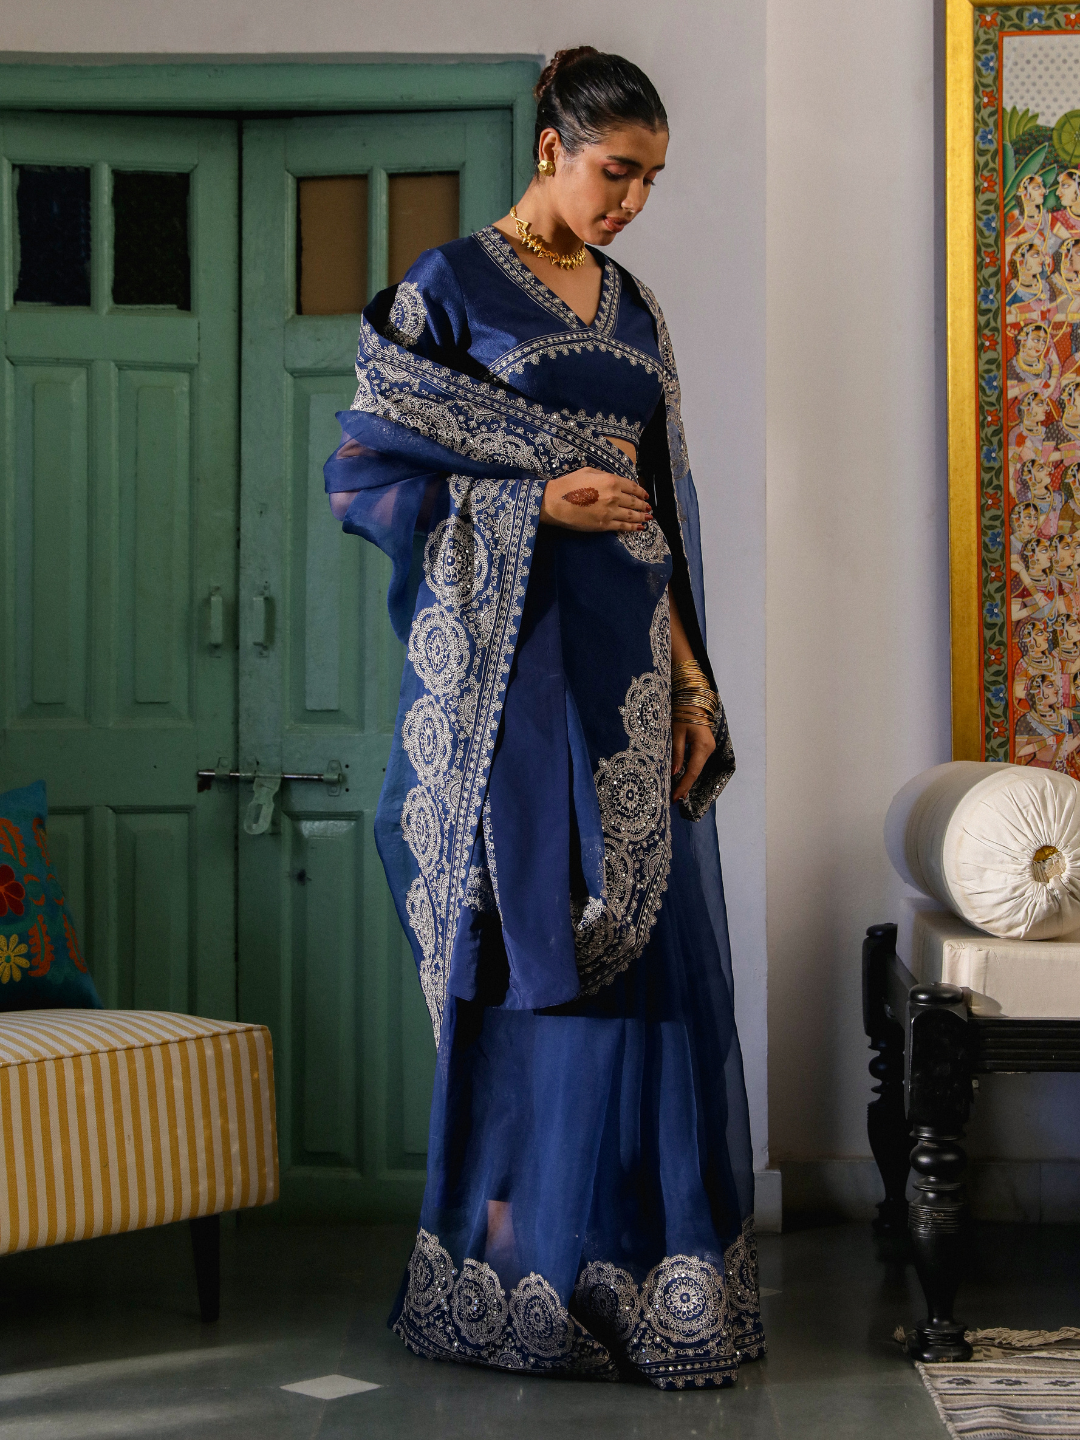 Blue Organza Saree Set with Zari Embroidery at Kamakhyaa by RoohbyRidhimaa. This item is Blue, Embroidered, Festive Wear, Free Size, Saree Sets, Toxin free, Zari Embroidered